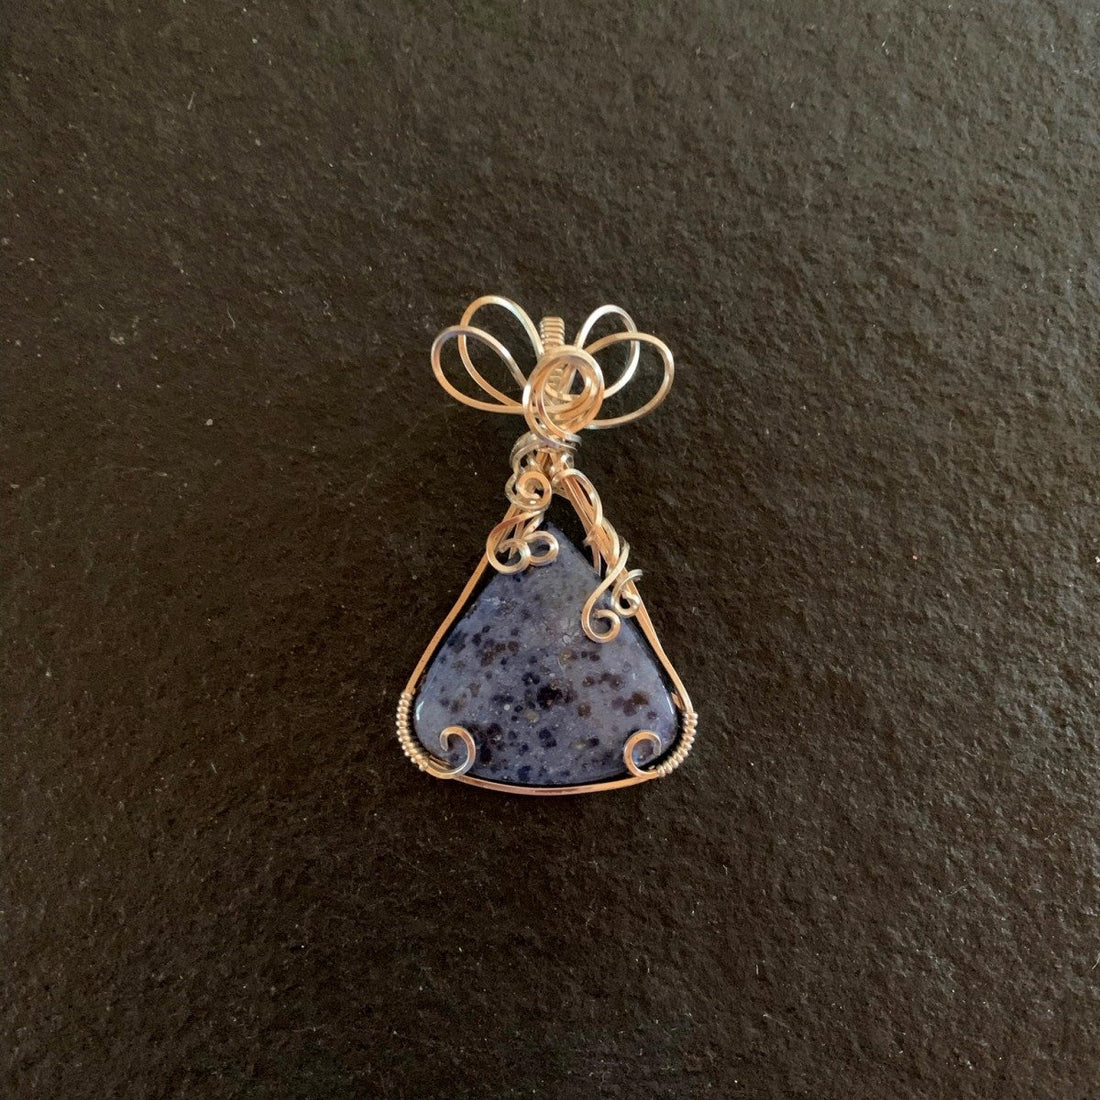 Pendant made of Dumortierite Triangle with silver wrap; 1.25" w x 2" h, incl bail